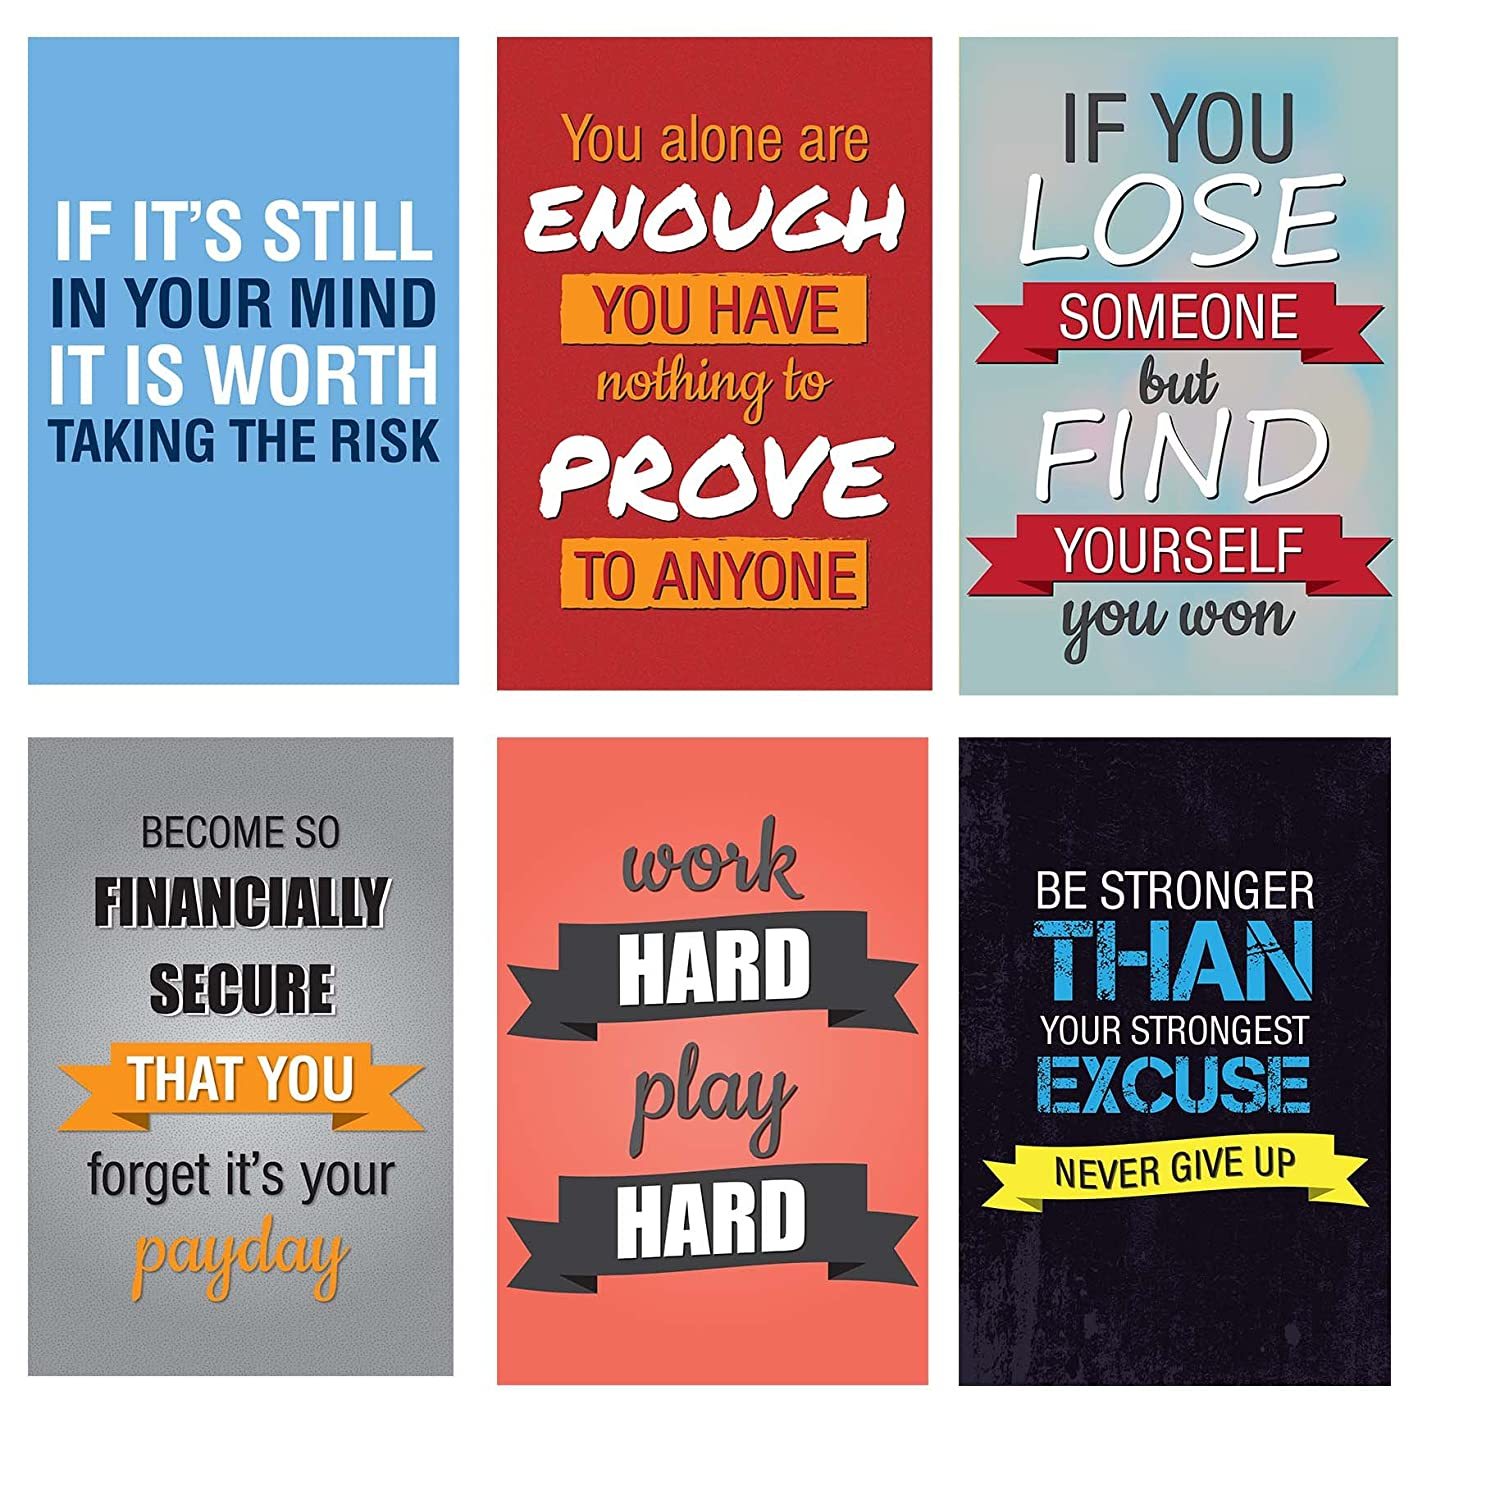 Business's Vision With Motivational Posters